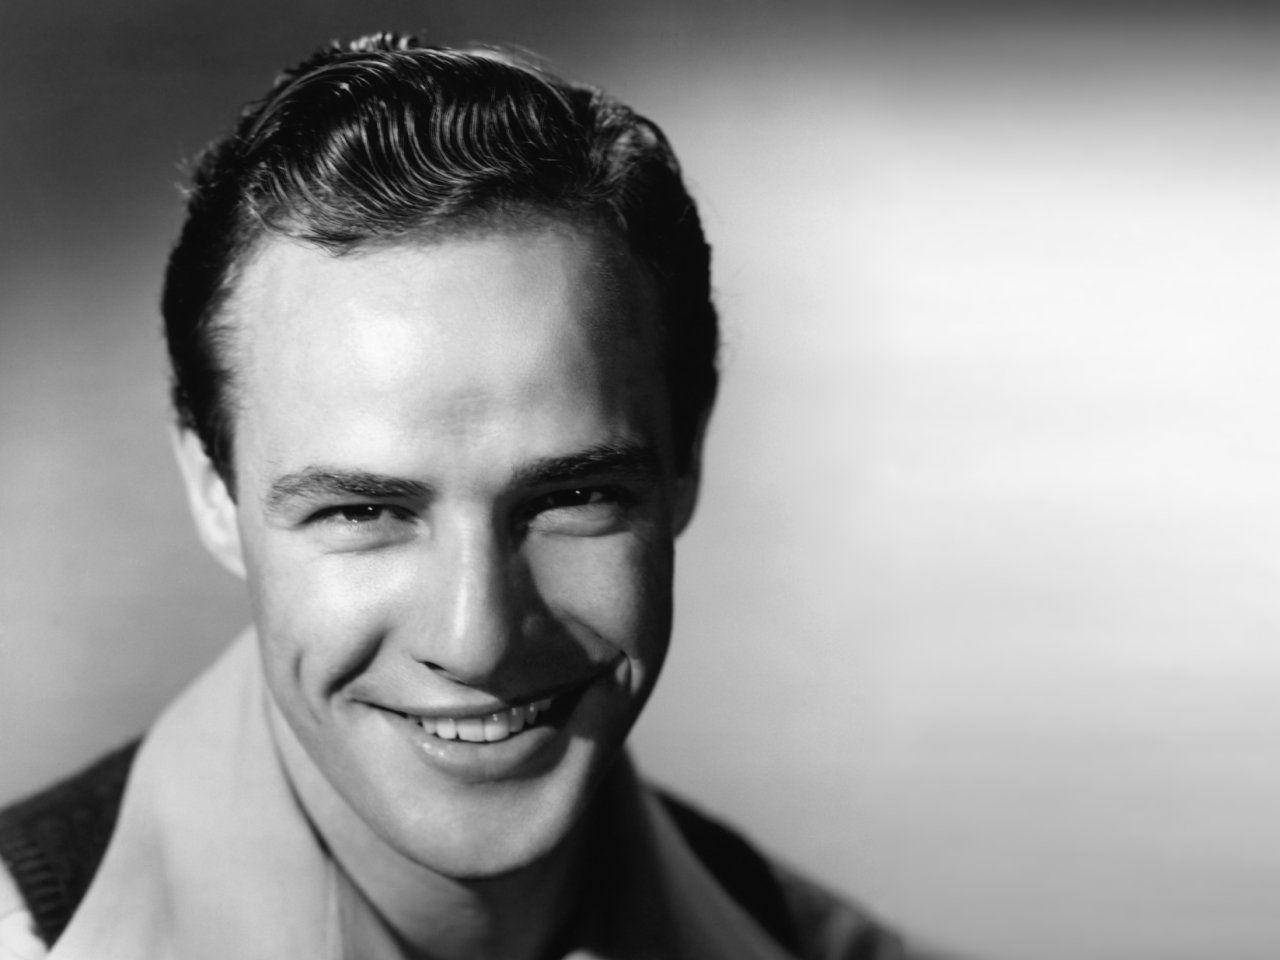 Marlon Brando Charming Smile With Dimples